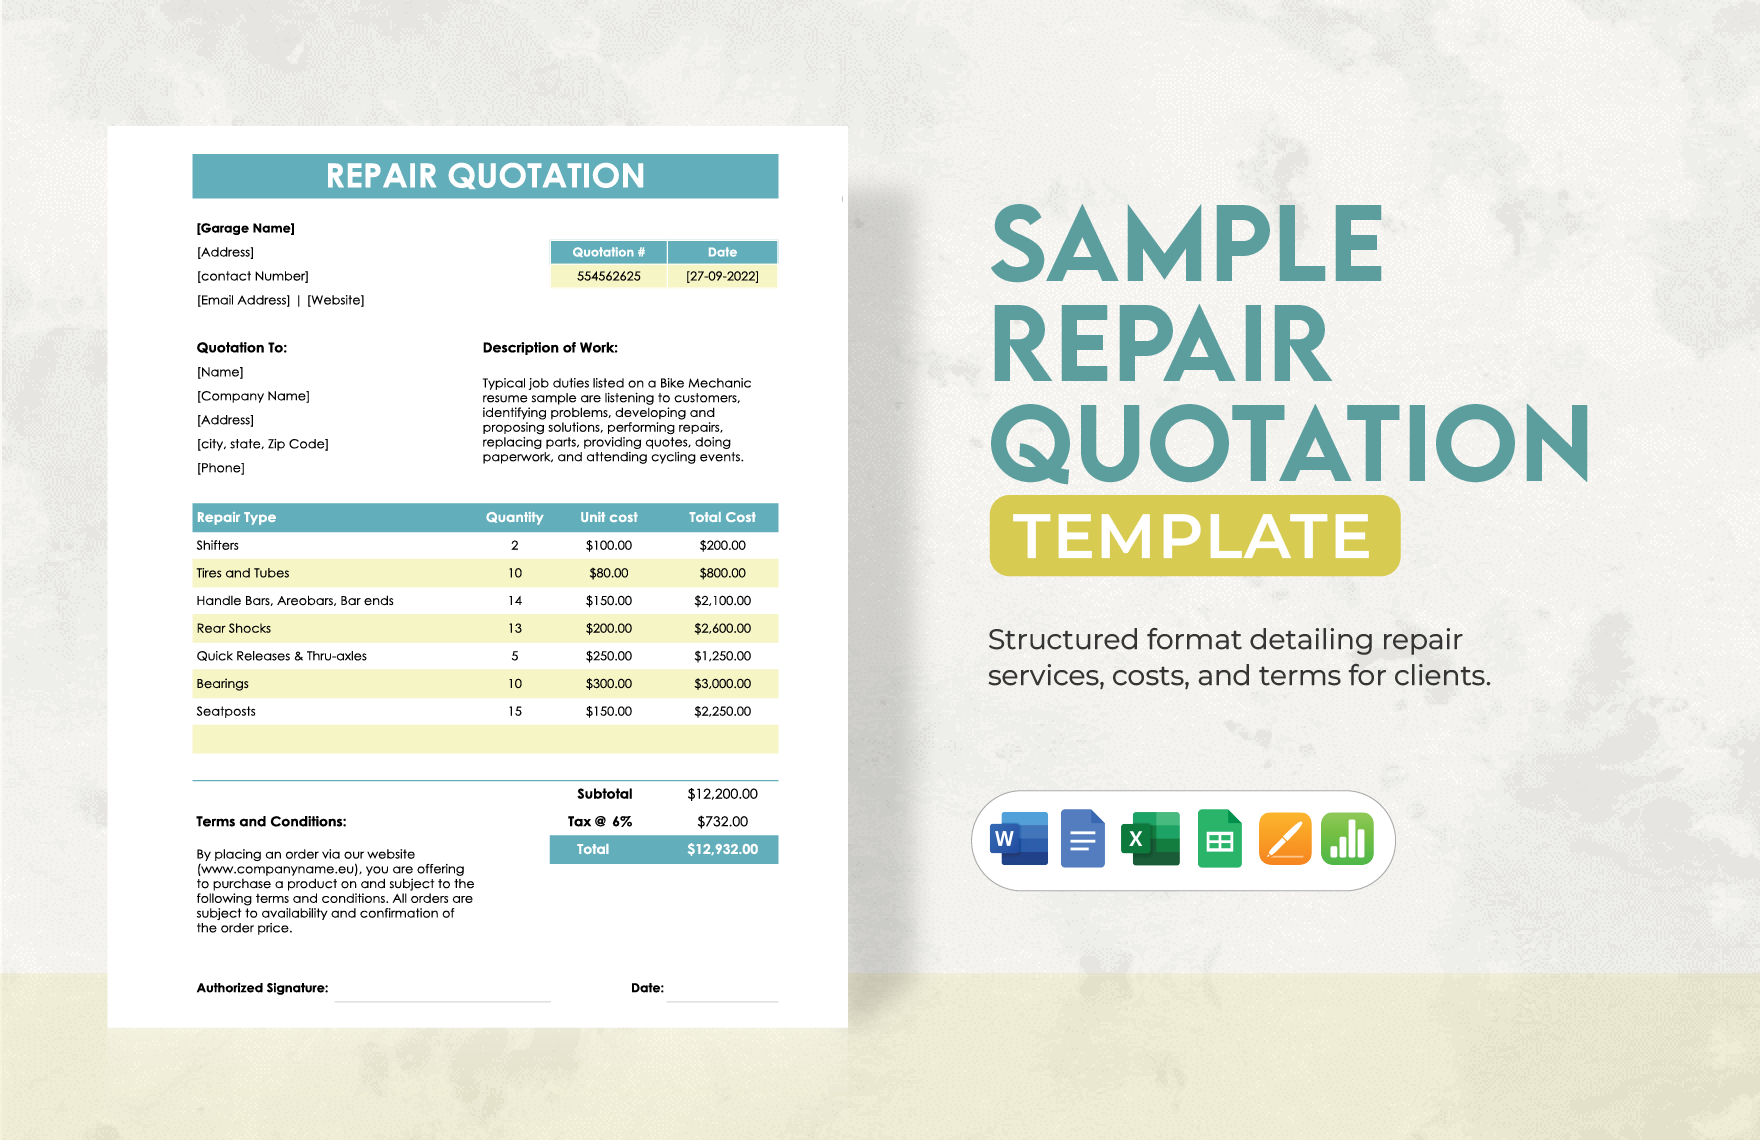 Free Sample Repair Quotation Template in Word, Google Docs, Excel, Google Sheets, Apple Pages, Apple Numbers